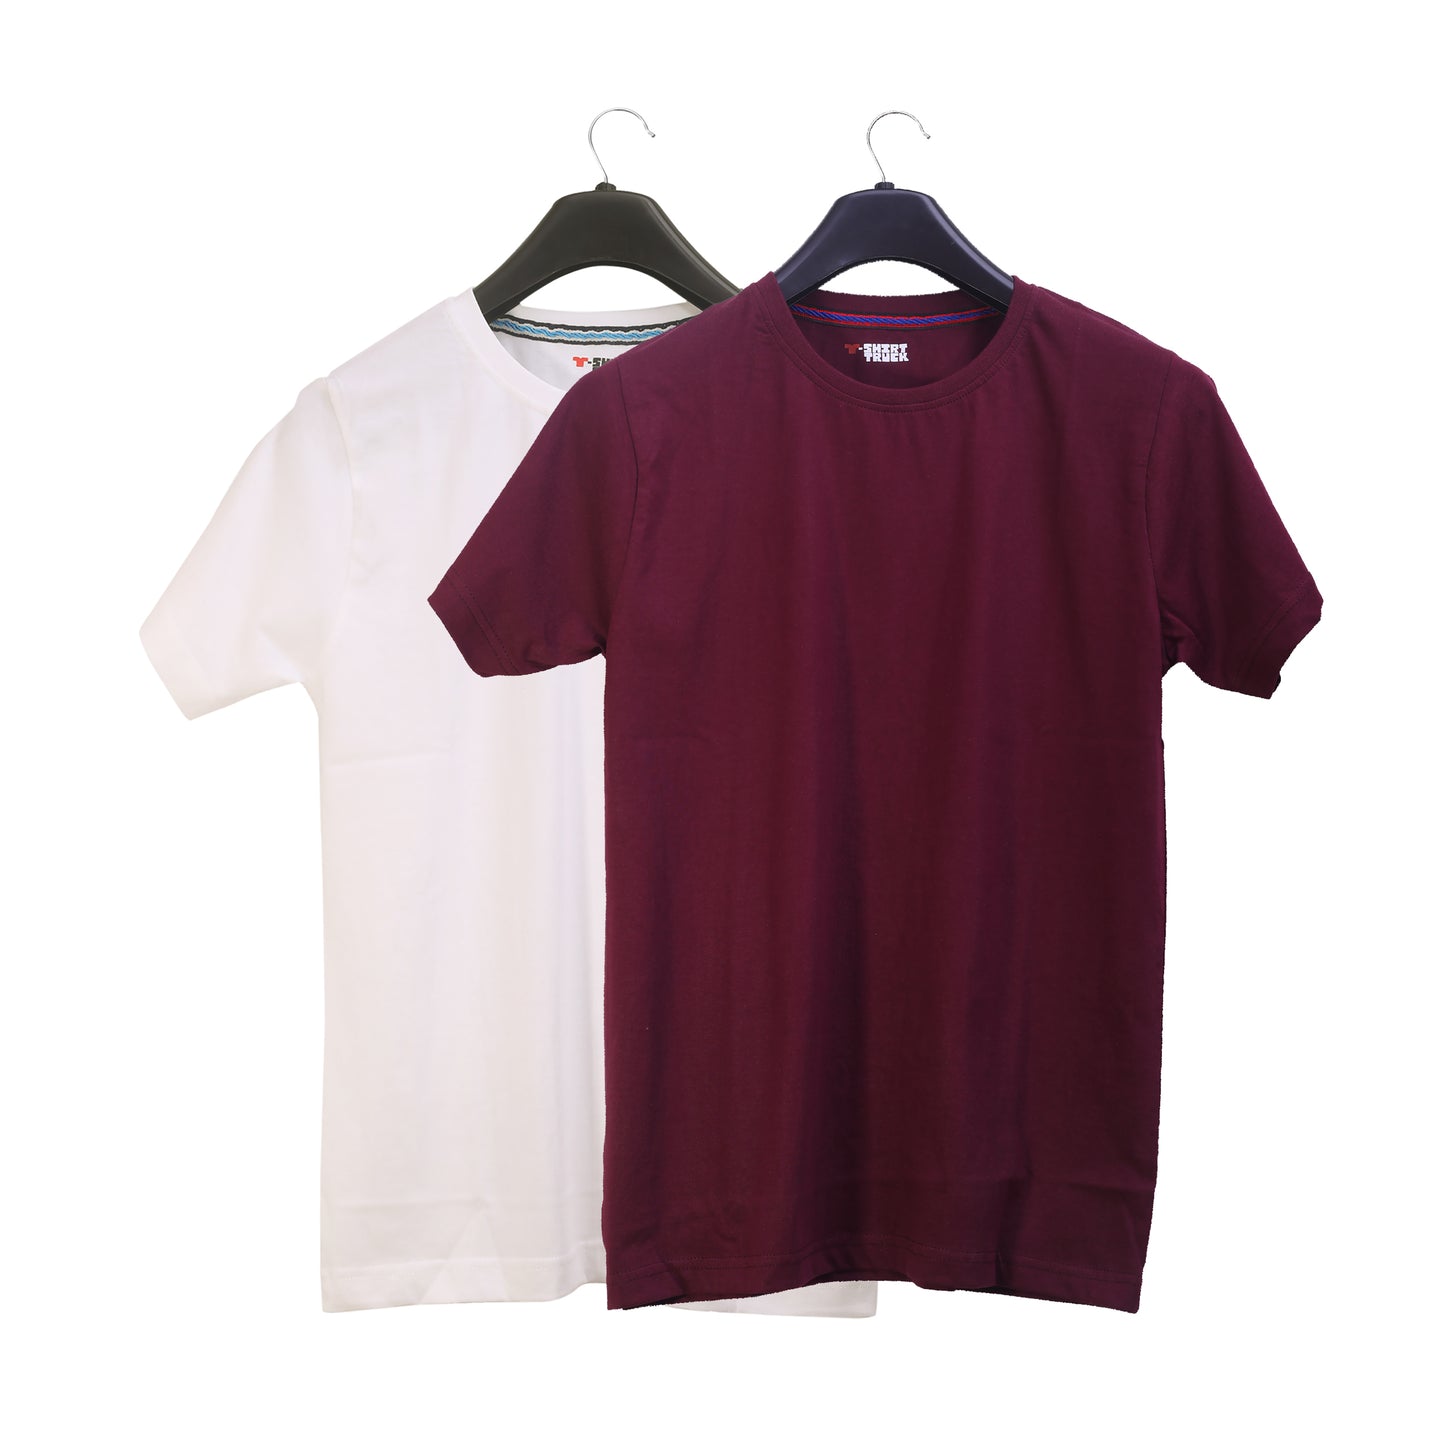 Unisex Round Neck Plain Solid Combo Pack of 2 T-shirts White & Maroon